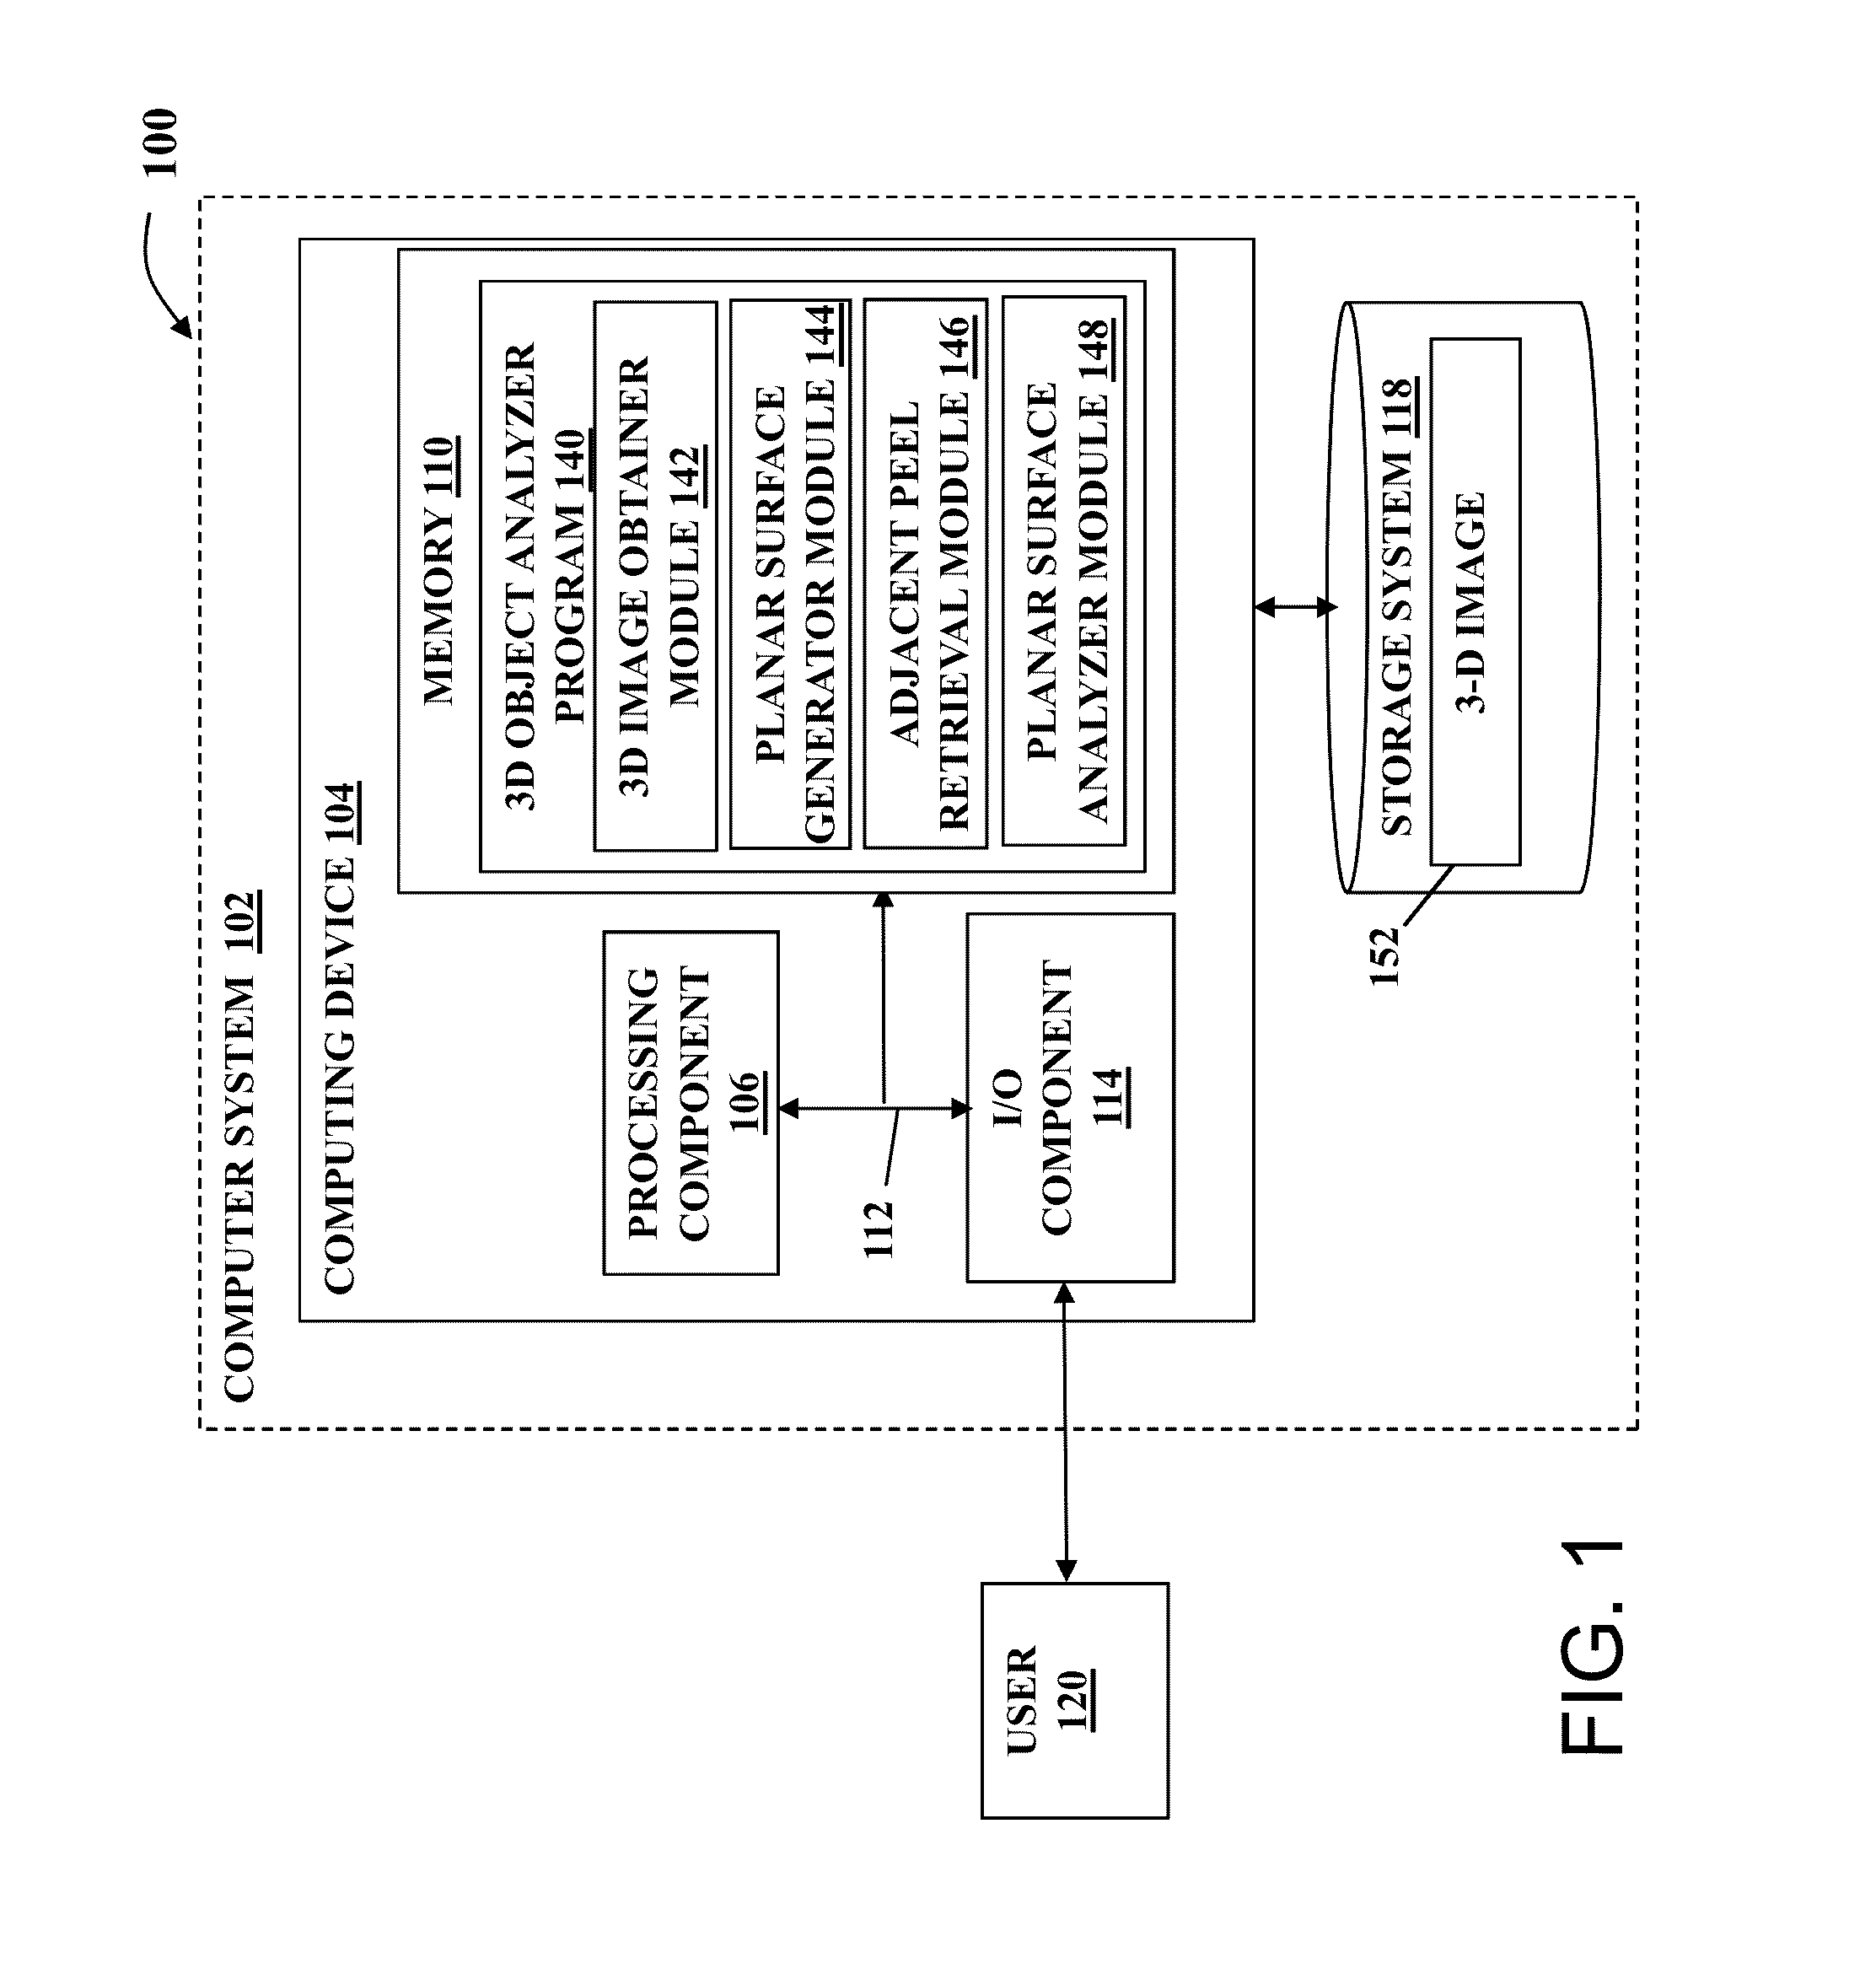 Method system and computer product for non-destructive object analysis